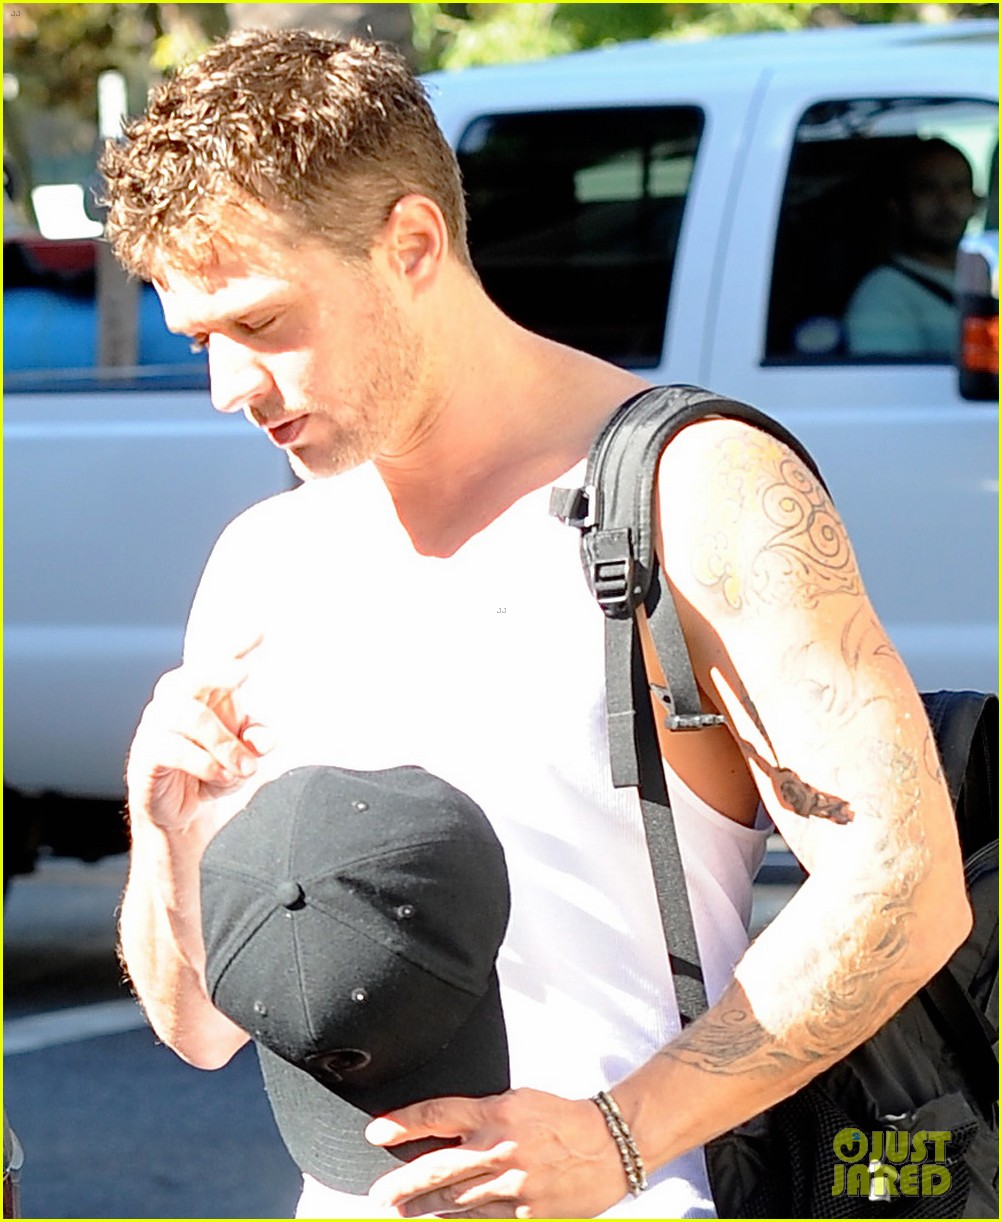 Ryan Phillippe shows off his tattoos while getting into his car after a wor...